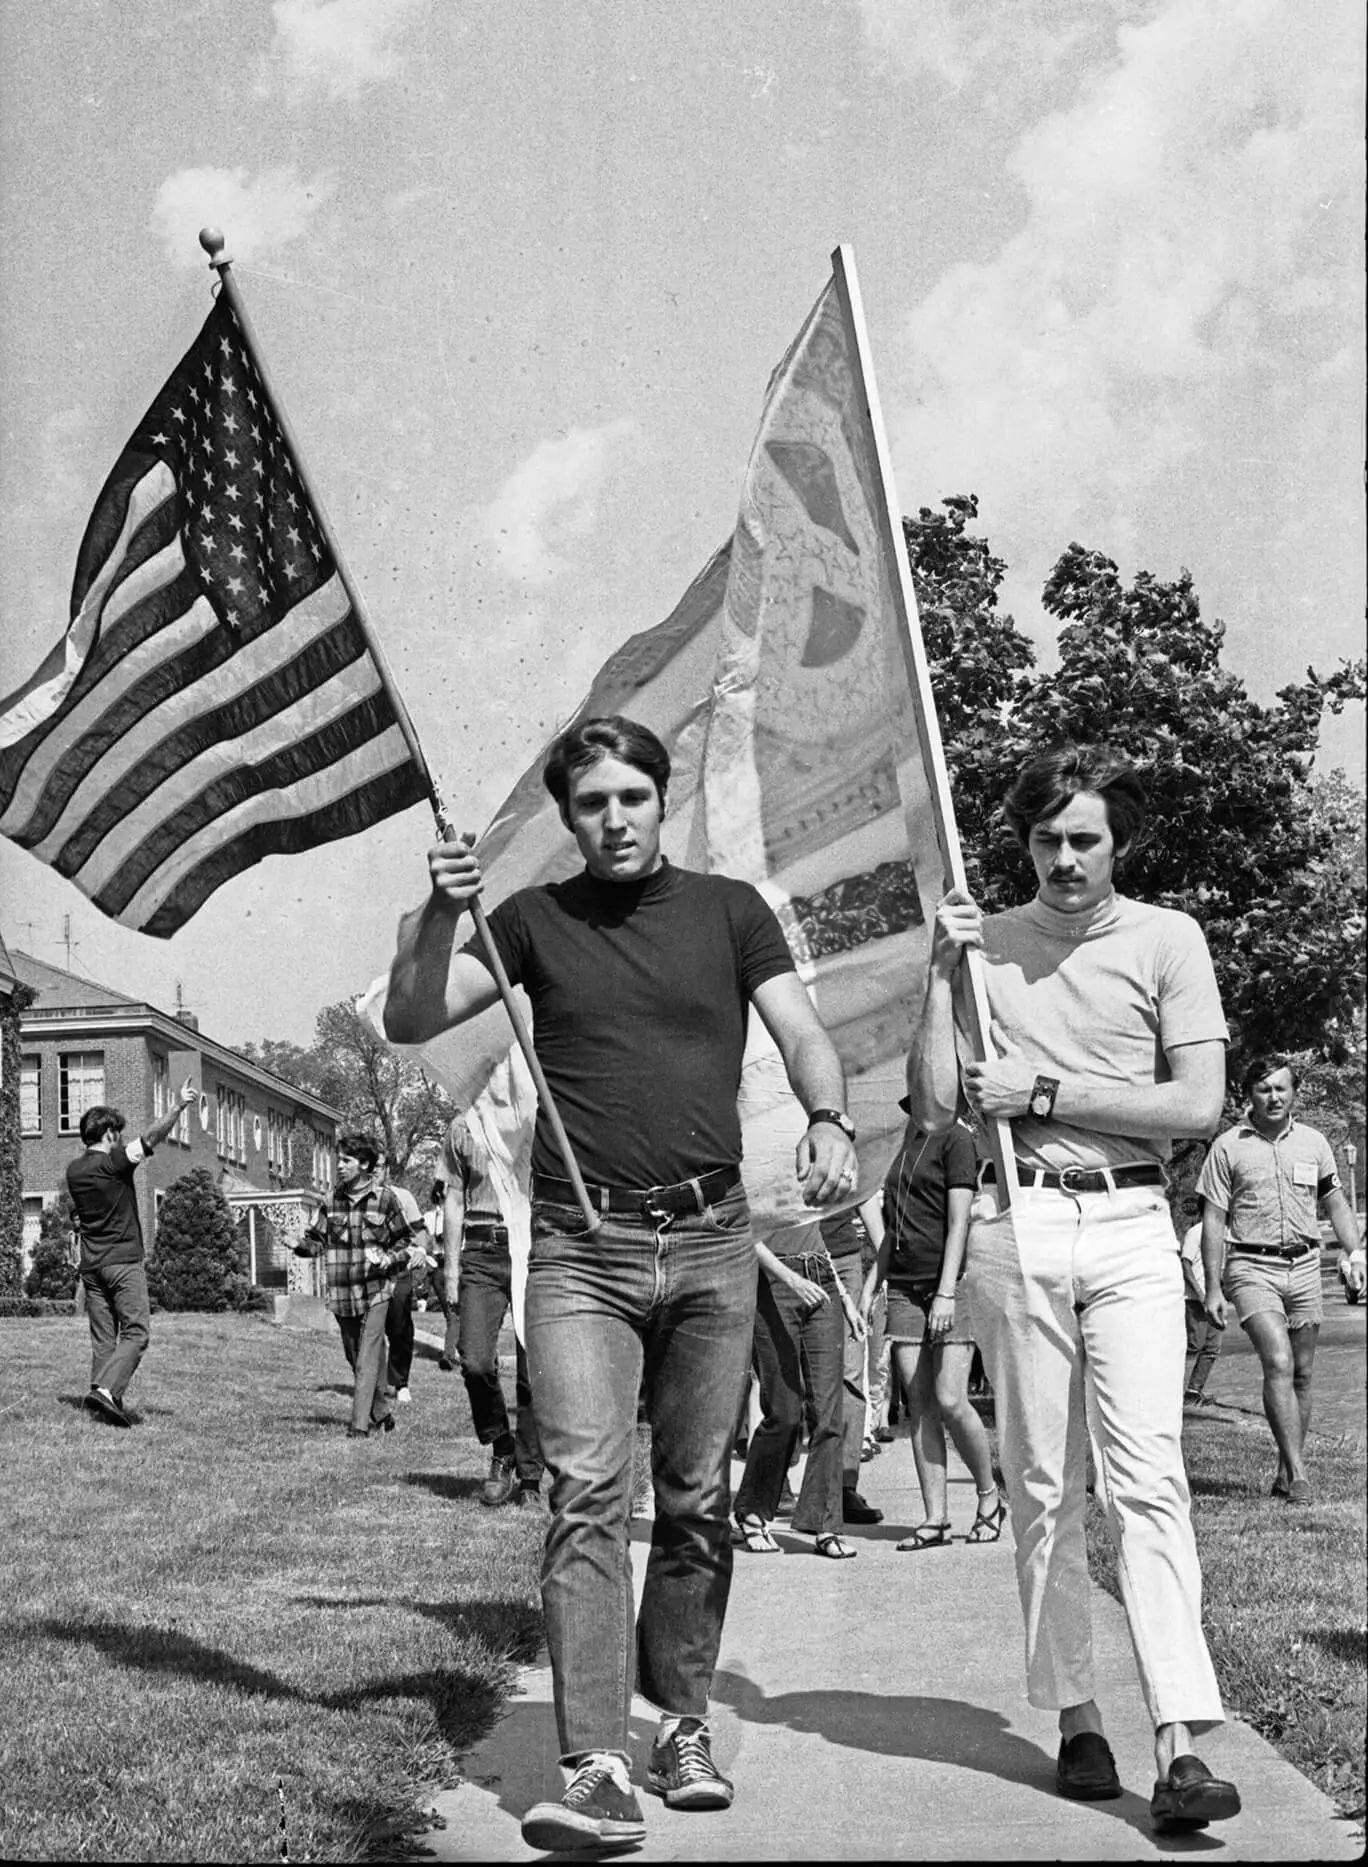 Two white men are walking and holding flags. One man with dark hair, a dark shirt, and dark jeans holds the American flag. A man next to him with dark hair and a mustache is wearing a light colored turtle neck and light colored pants. He is holding a hand-drawn peace flag.